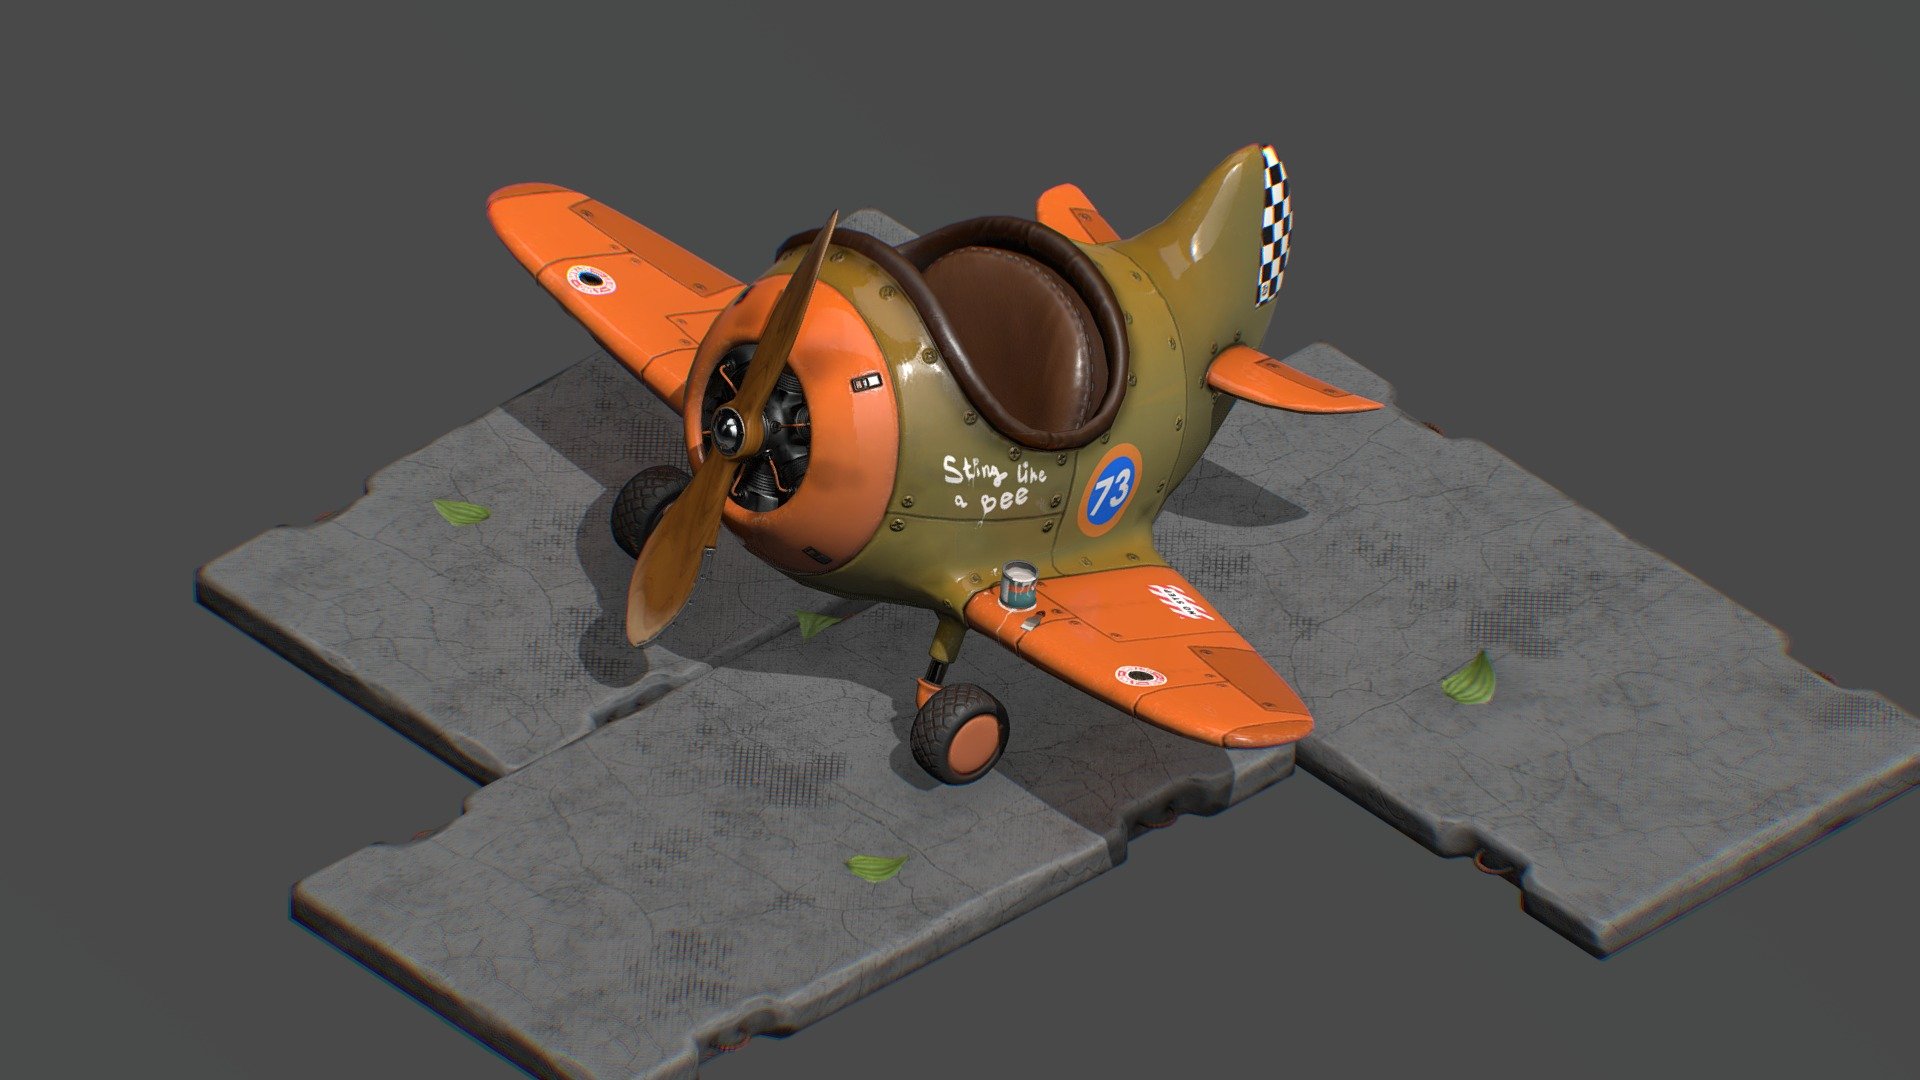 Little plane with big ambishions! Lowpoly model with PBR material. Modeled in Blender and Zbrush, baked in Marmoset toolbag, textured in Substance painter and Photoshop.
Textures (2048x2048):

Base color 
AO
Metallnes
Roughness
Normal map

Here some renders: https://www.artstation.com/artwork/OoEKZe

4K TEXTURES IF NEEDED!!! - Stylized lowpoly airplane - 3D model by Forpinik 3d model